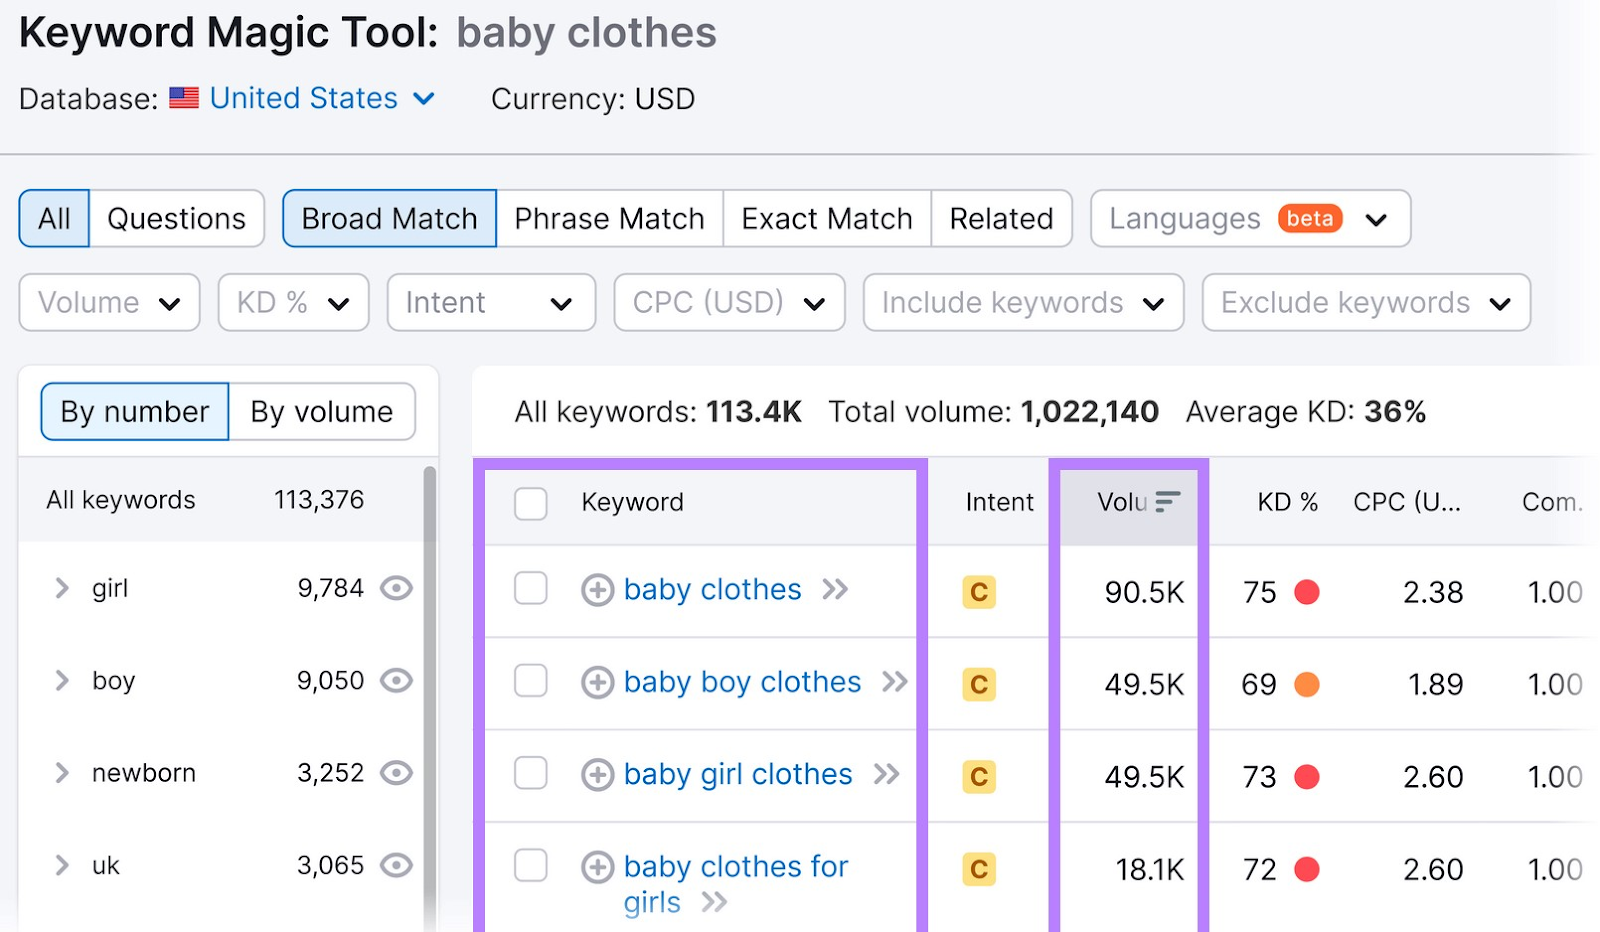 results for "baby clothes" search in Keyword Magic Tool